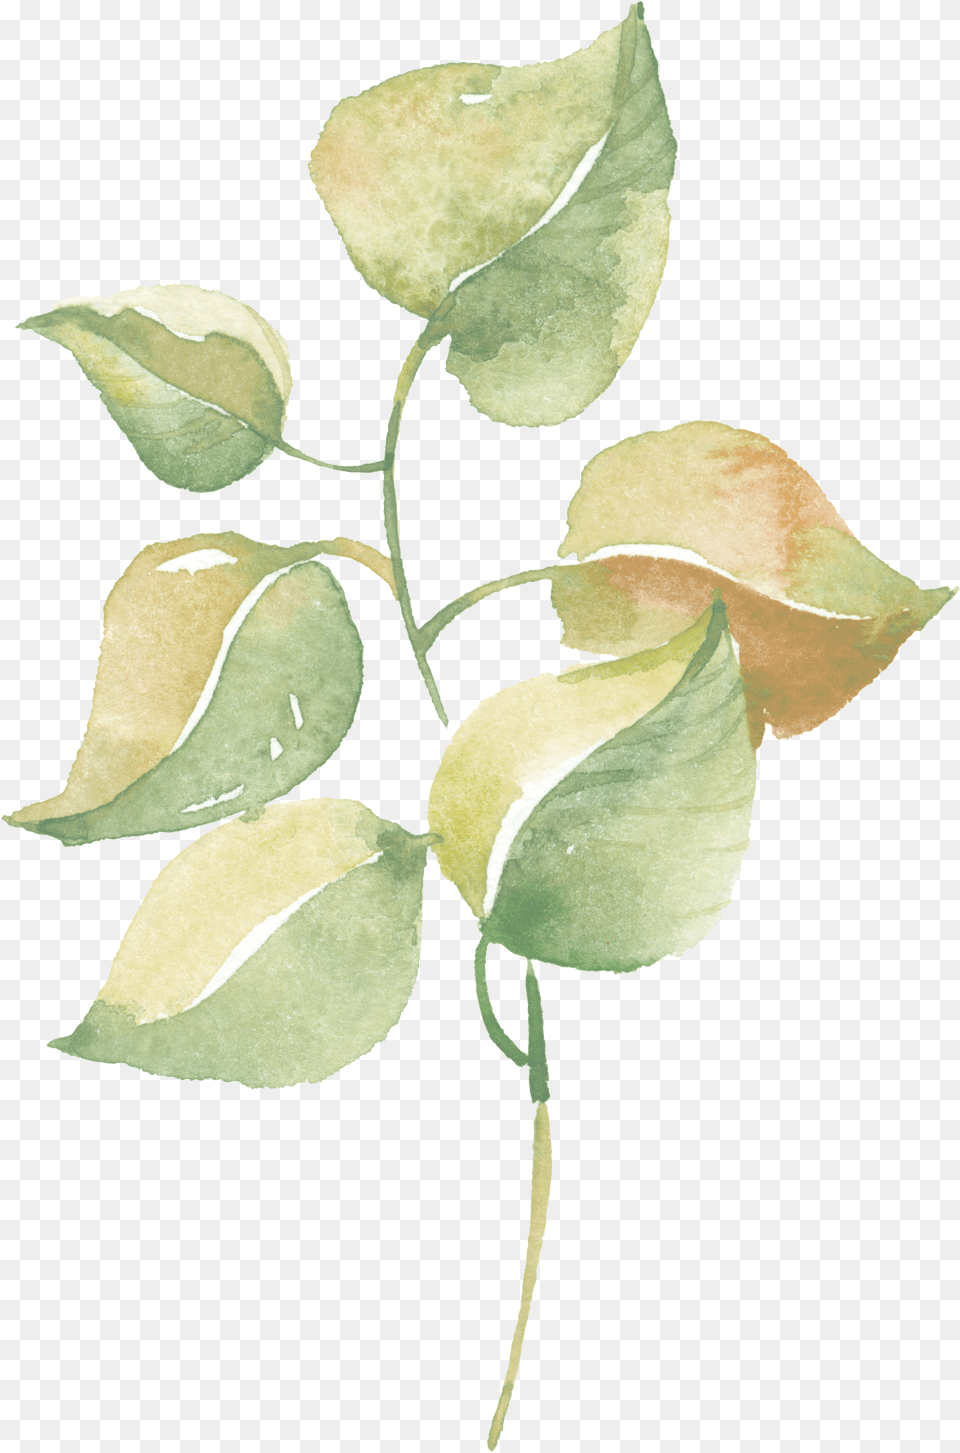 Watercolor Greenery Vector Download Greenery Watercolor Transparent Background, Leaf, Plant, Herbal, Herbs Png Image